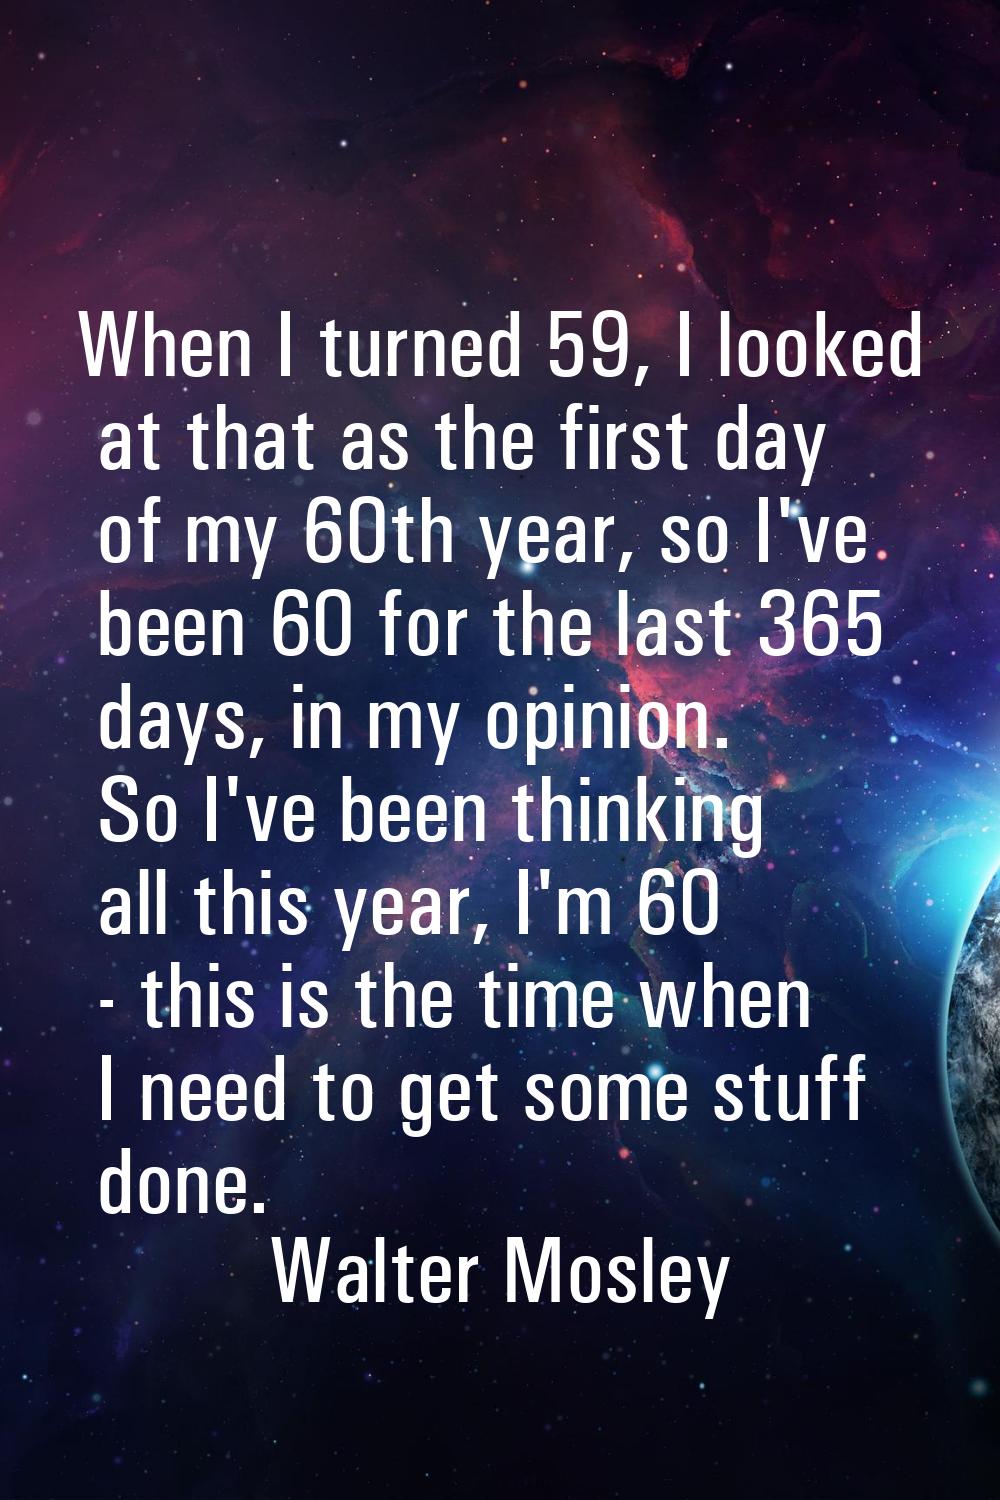 When I turned 59, I looked at that as the first day of my 60th year, so I've been 60 for the last 3